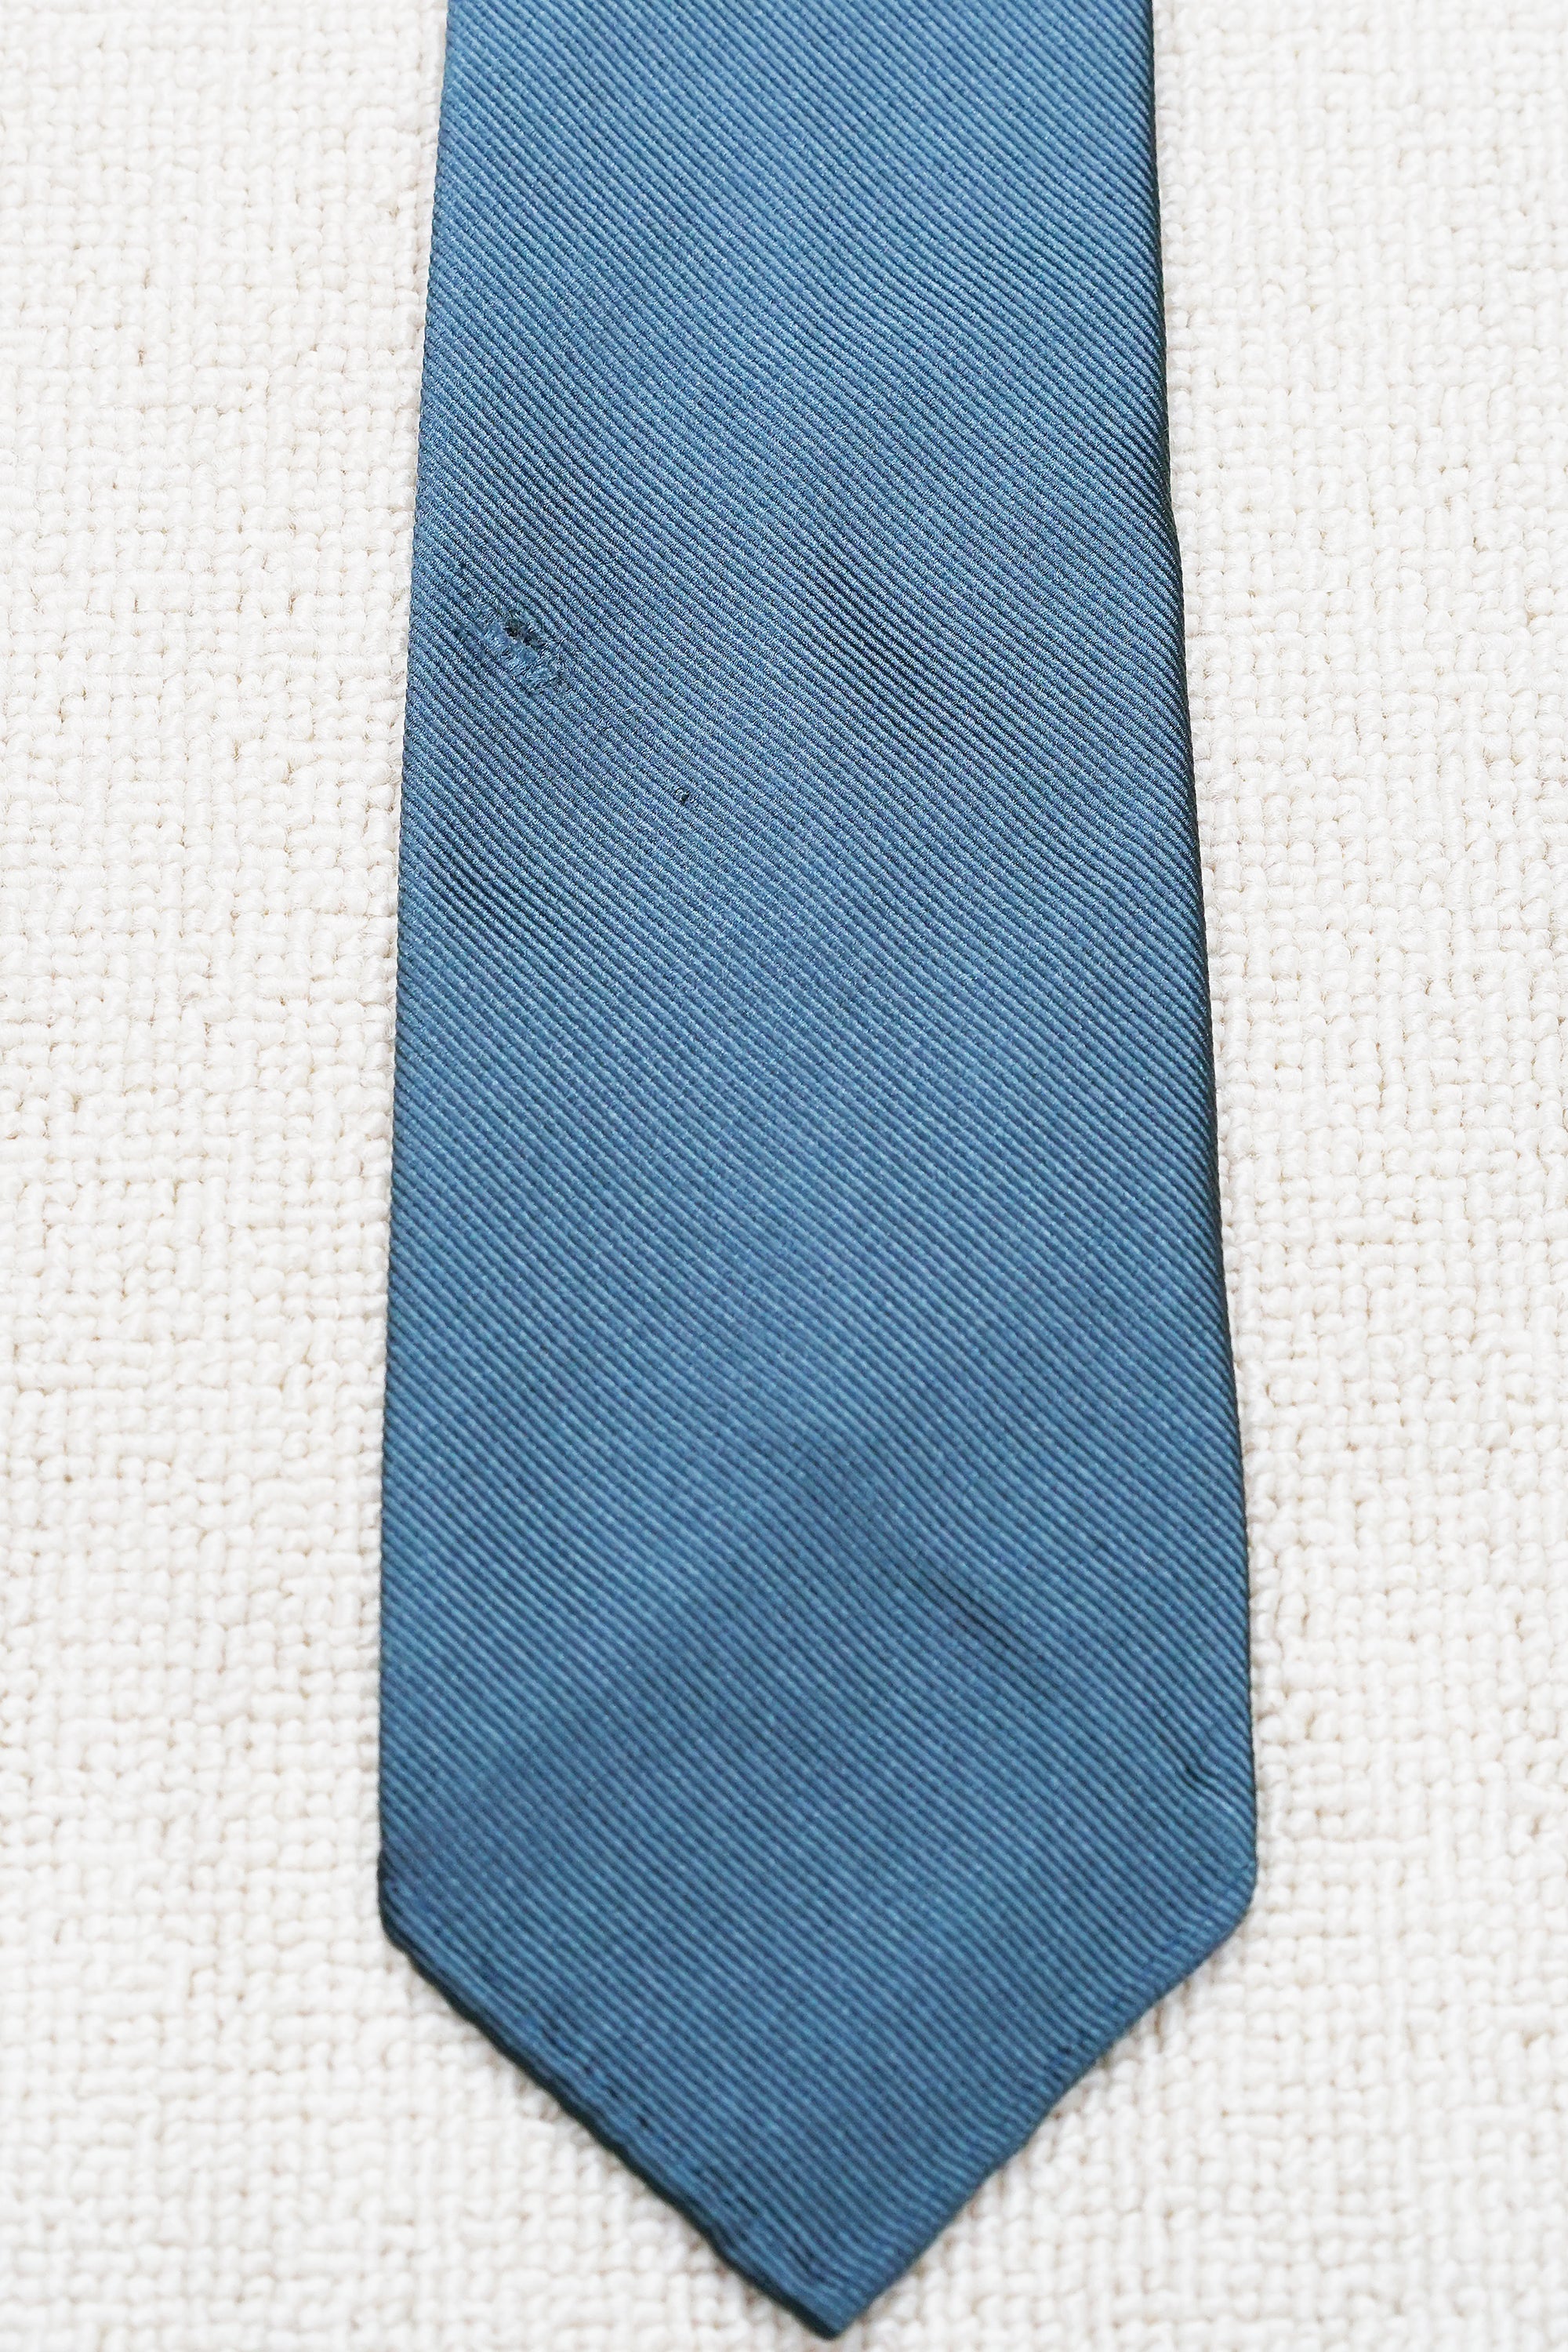 Drake's Blue Solid Woven Silk Tie *sample*